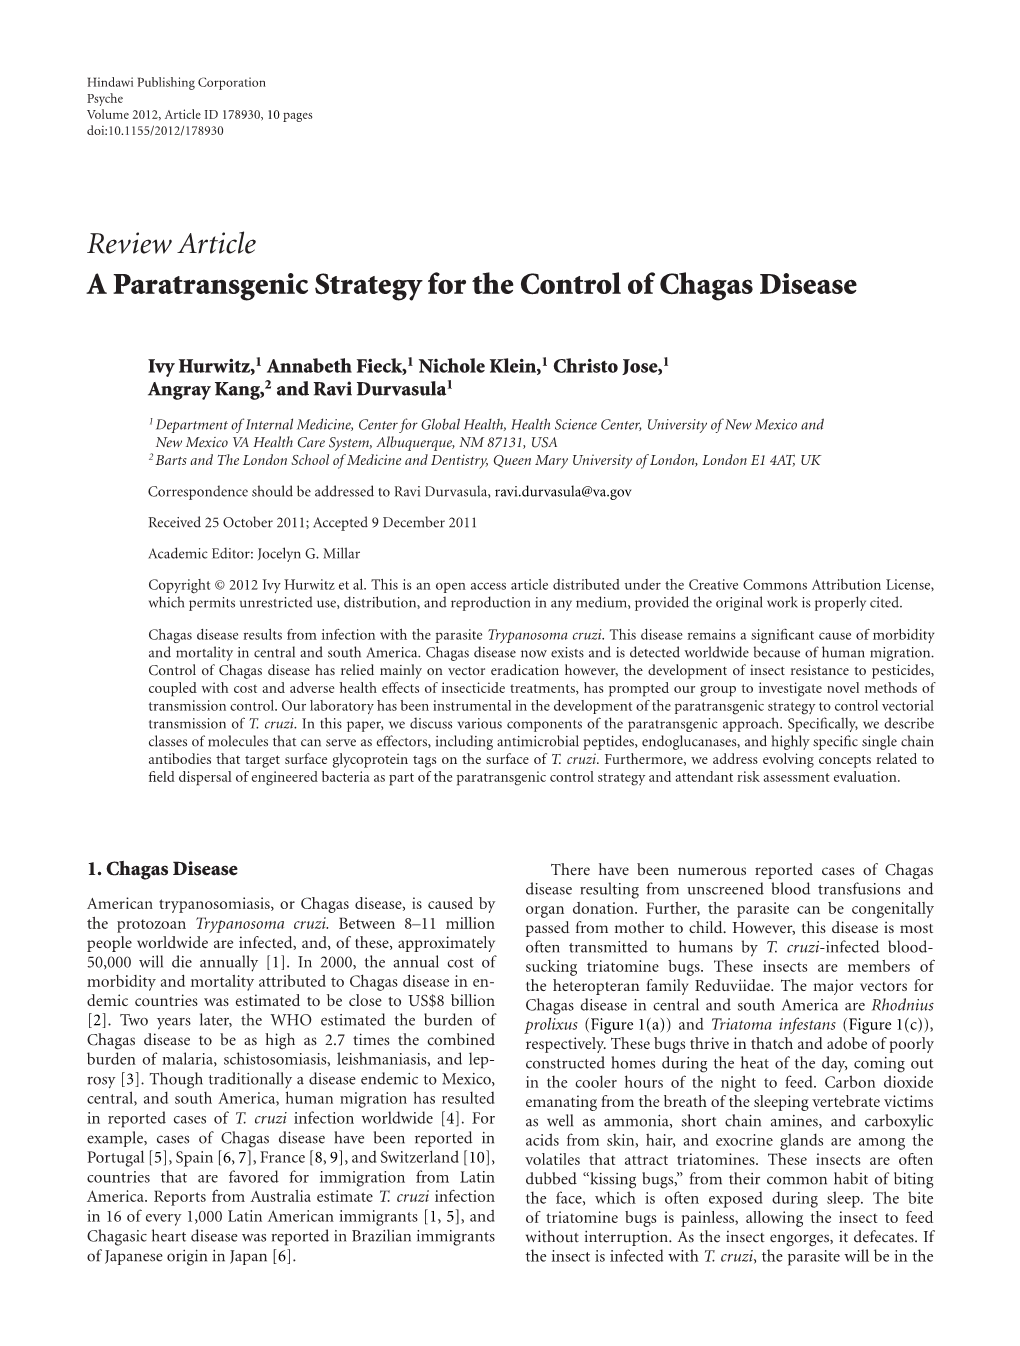 A Paratransgenic Strategy for the Control of Chagas Disease